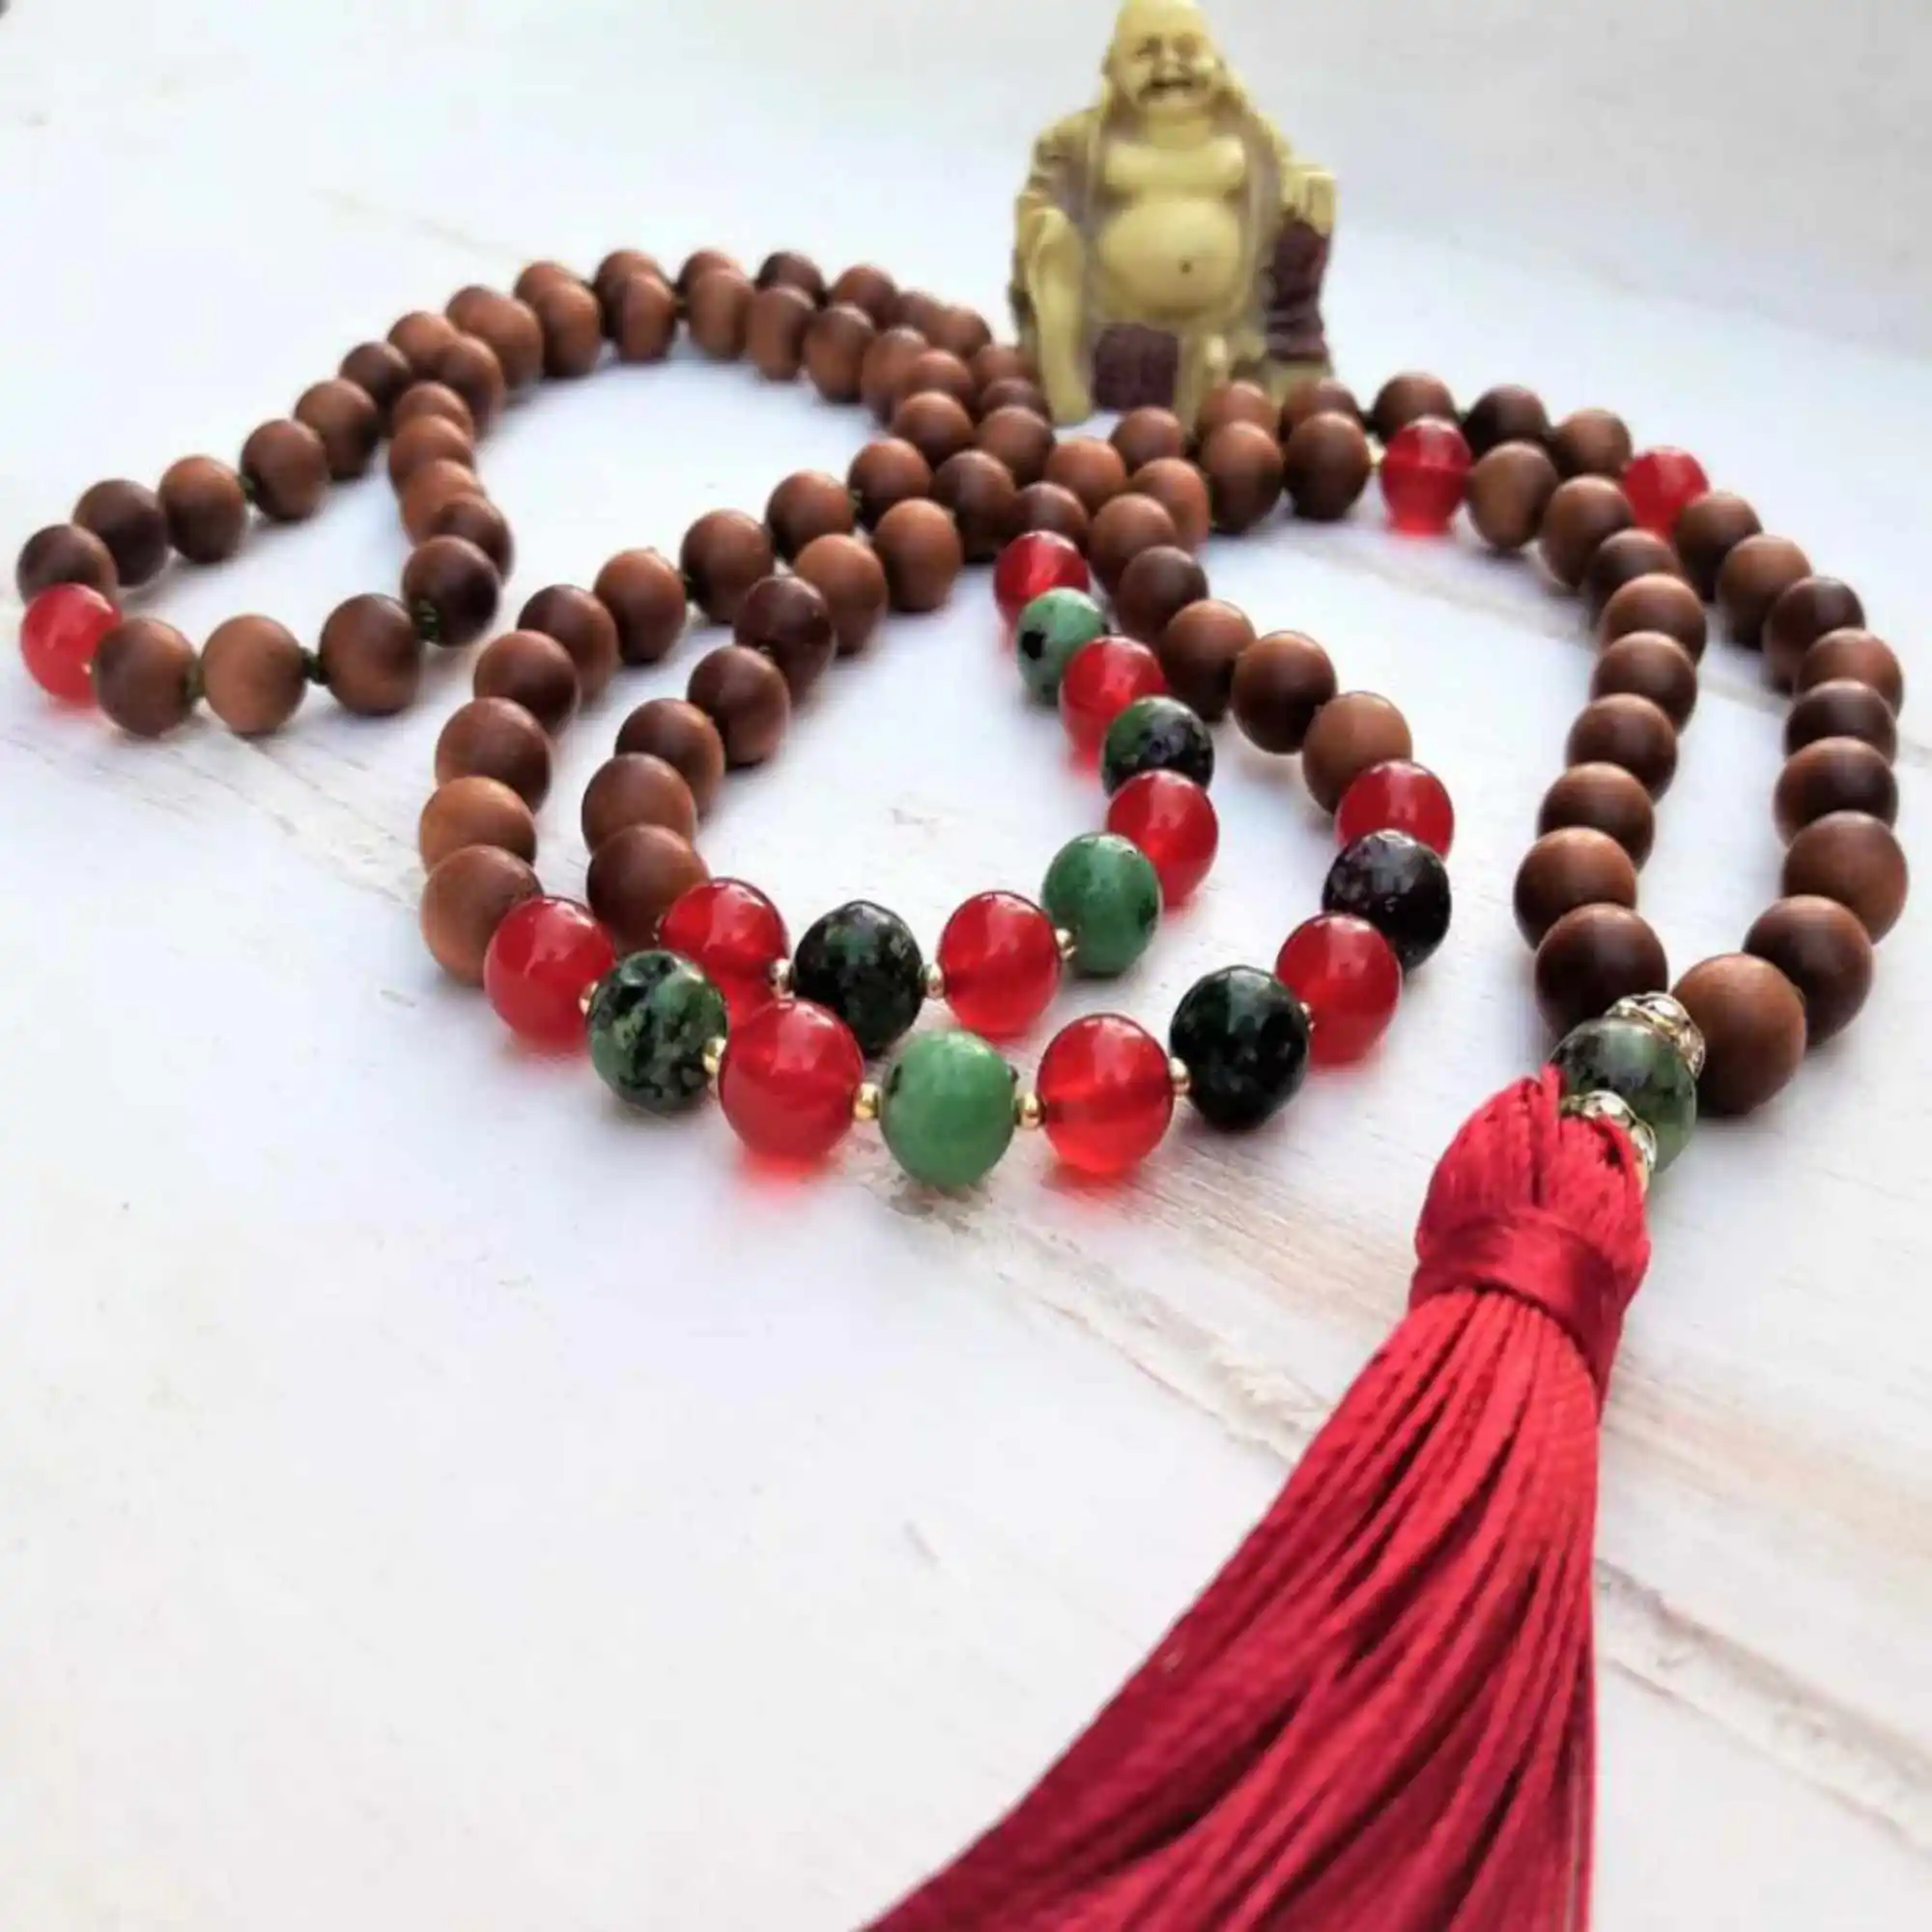 

8mm Natural knot Sandalwood ruby red jade beads necklace Meditation Relief Chakra Bohemia Wristband spread Souvenir Healing